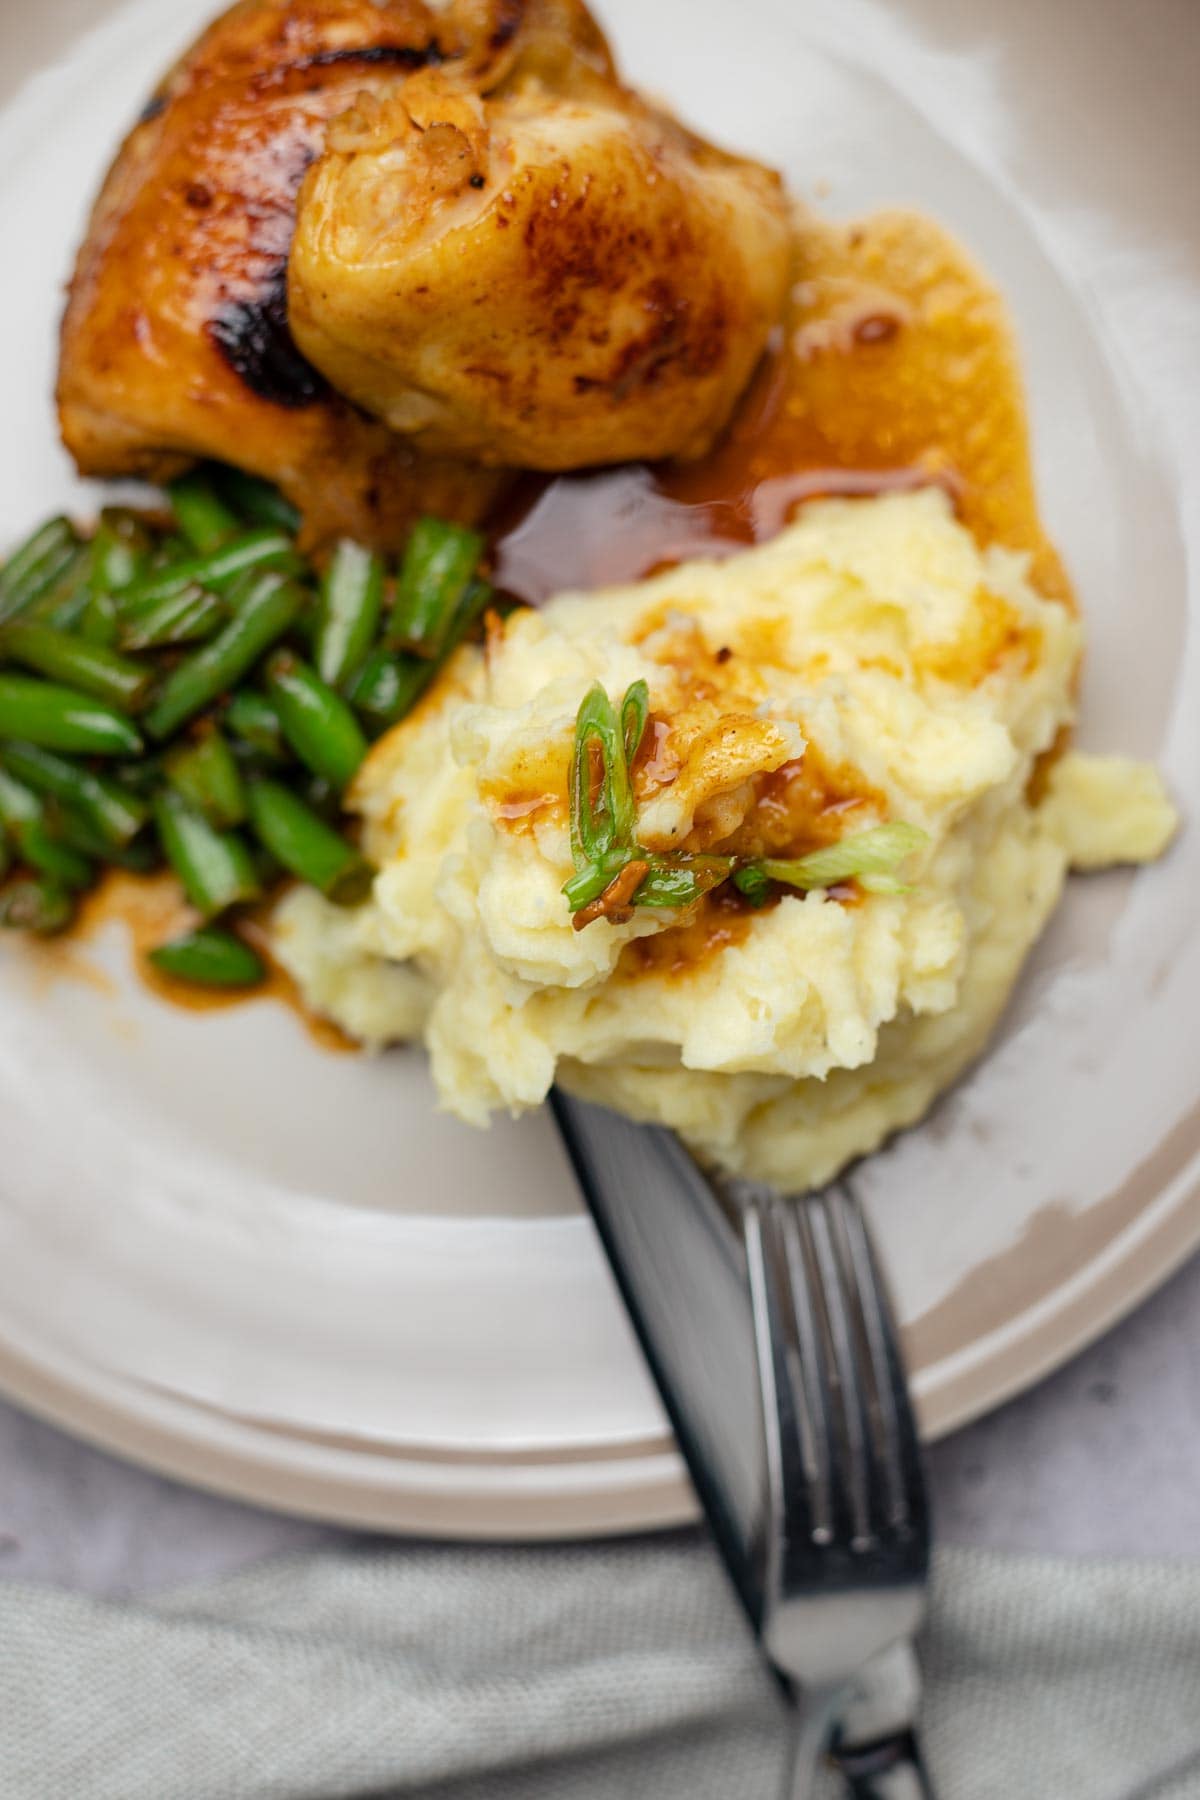 Mashed potatoes made in kitchen aid mixer on a plate with sous-vide chicken thighs and green beans.